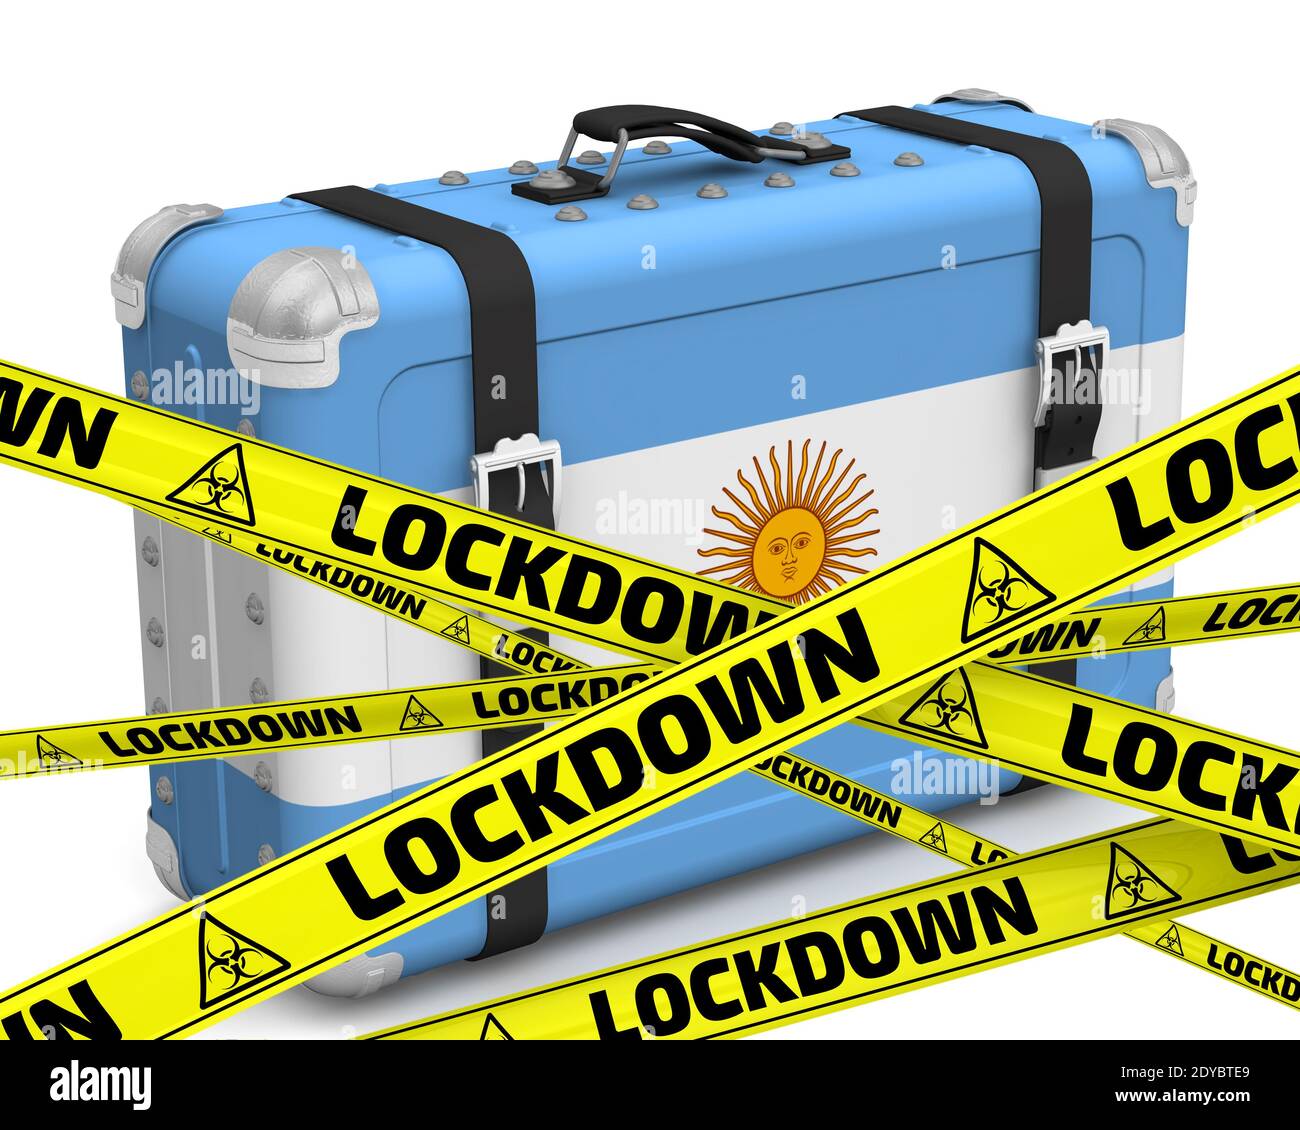 Argentina is in lockdown. Retro suitcase with the flag of the Argentine Republic on a white surface with yellow warning tapes that say LOCKDOWN Stock Photo